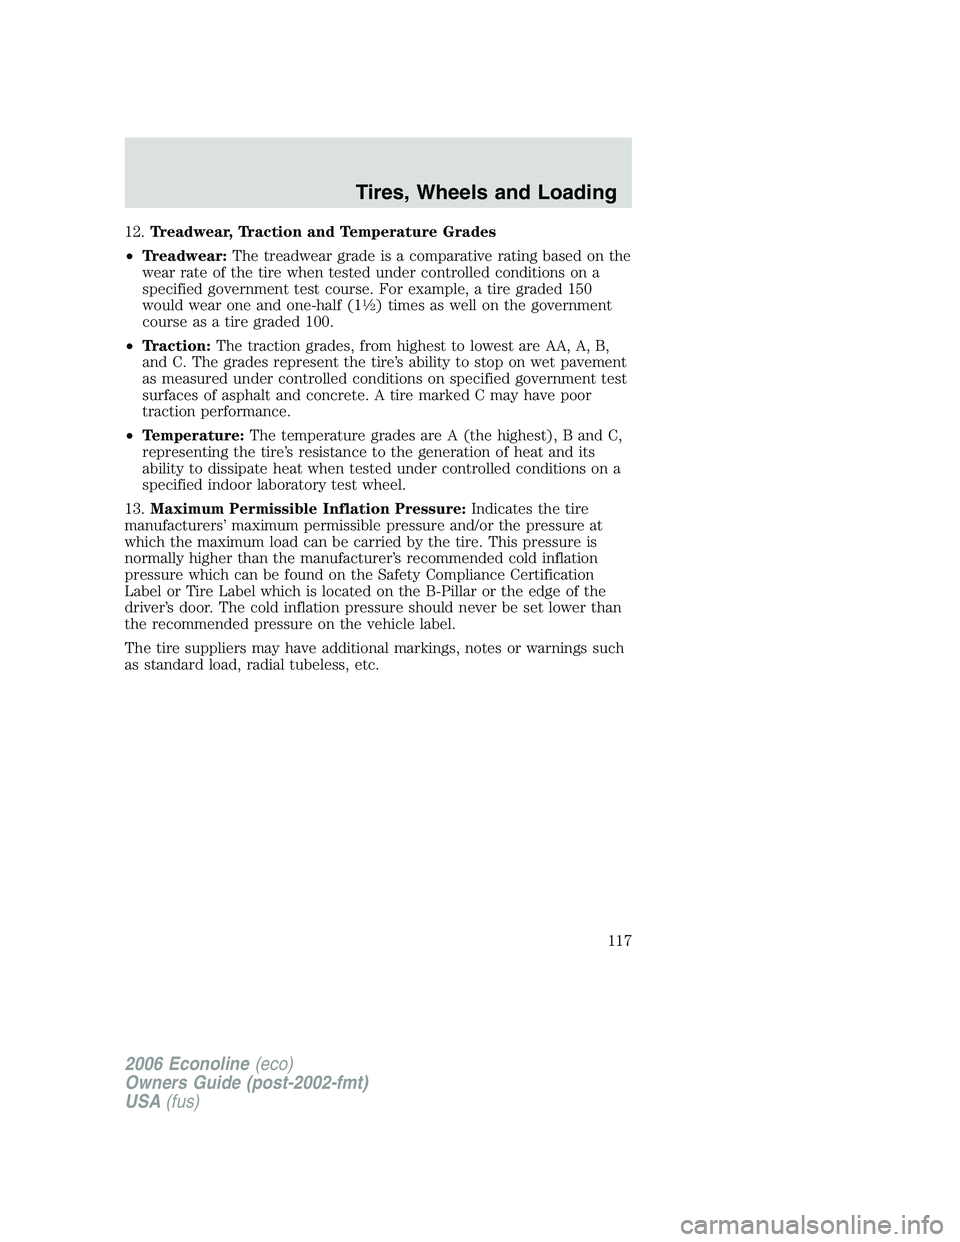 FORD E450 2006  Owners Manual 12.Treadwear, Traction and Temperature Grades
•Treadwear:The treadwear grade is a comparative rating based on the
wear rate of the tire when tested under controlled conditions on a
specified governm